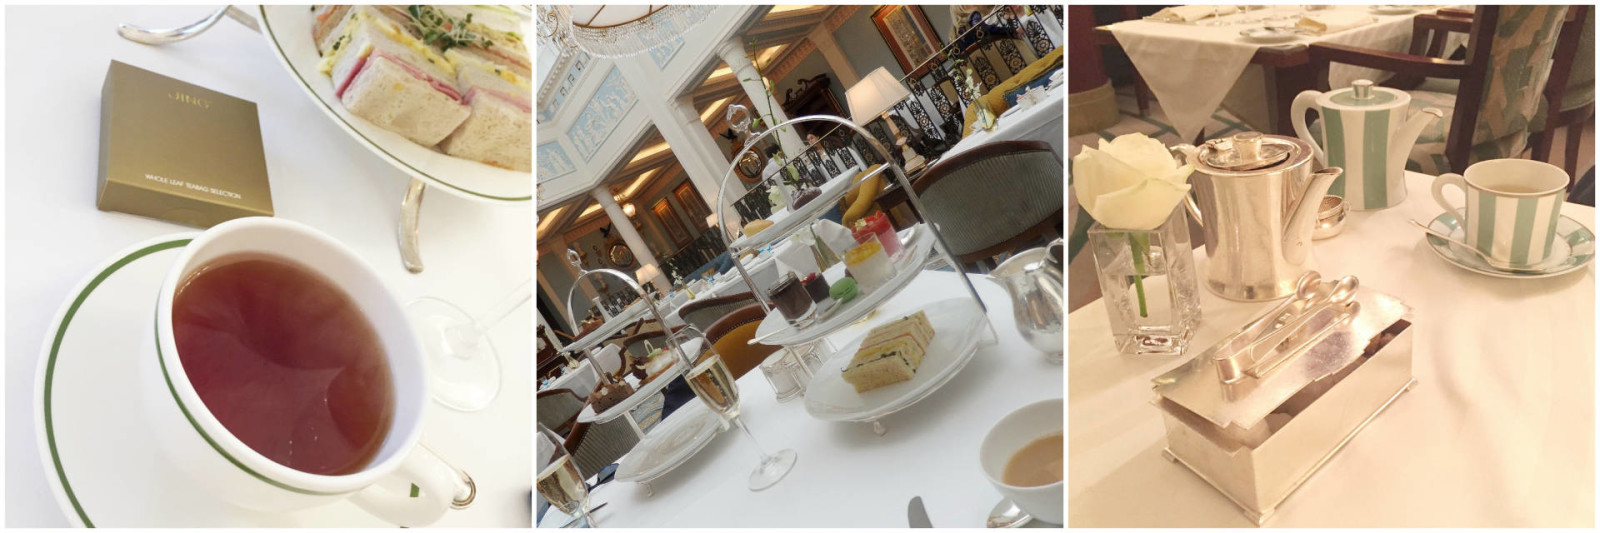 Where-Did-the-Wind-Blow-Me-and-a-few-other-reflections-My-2015-Review-Best-Gluten-Free-Afternoon-Tea